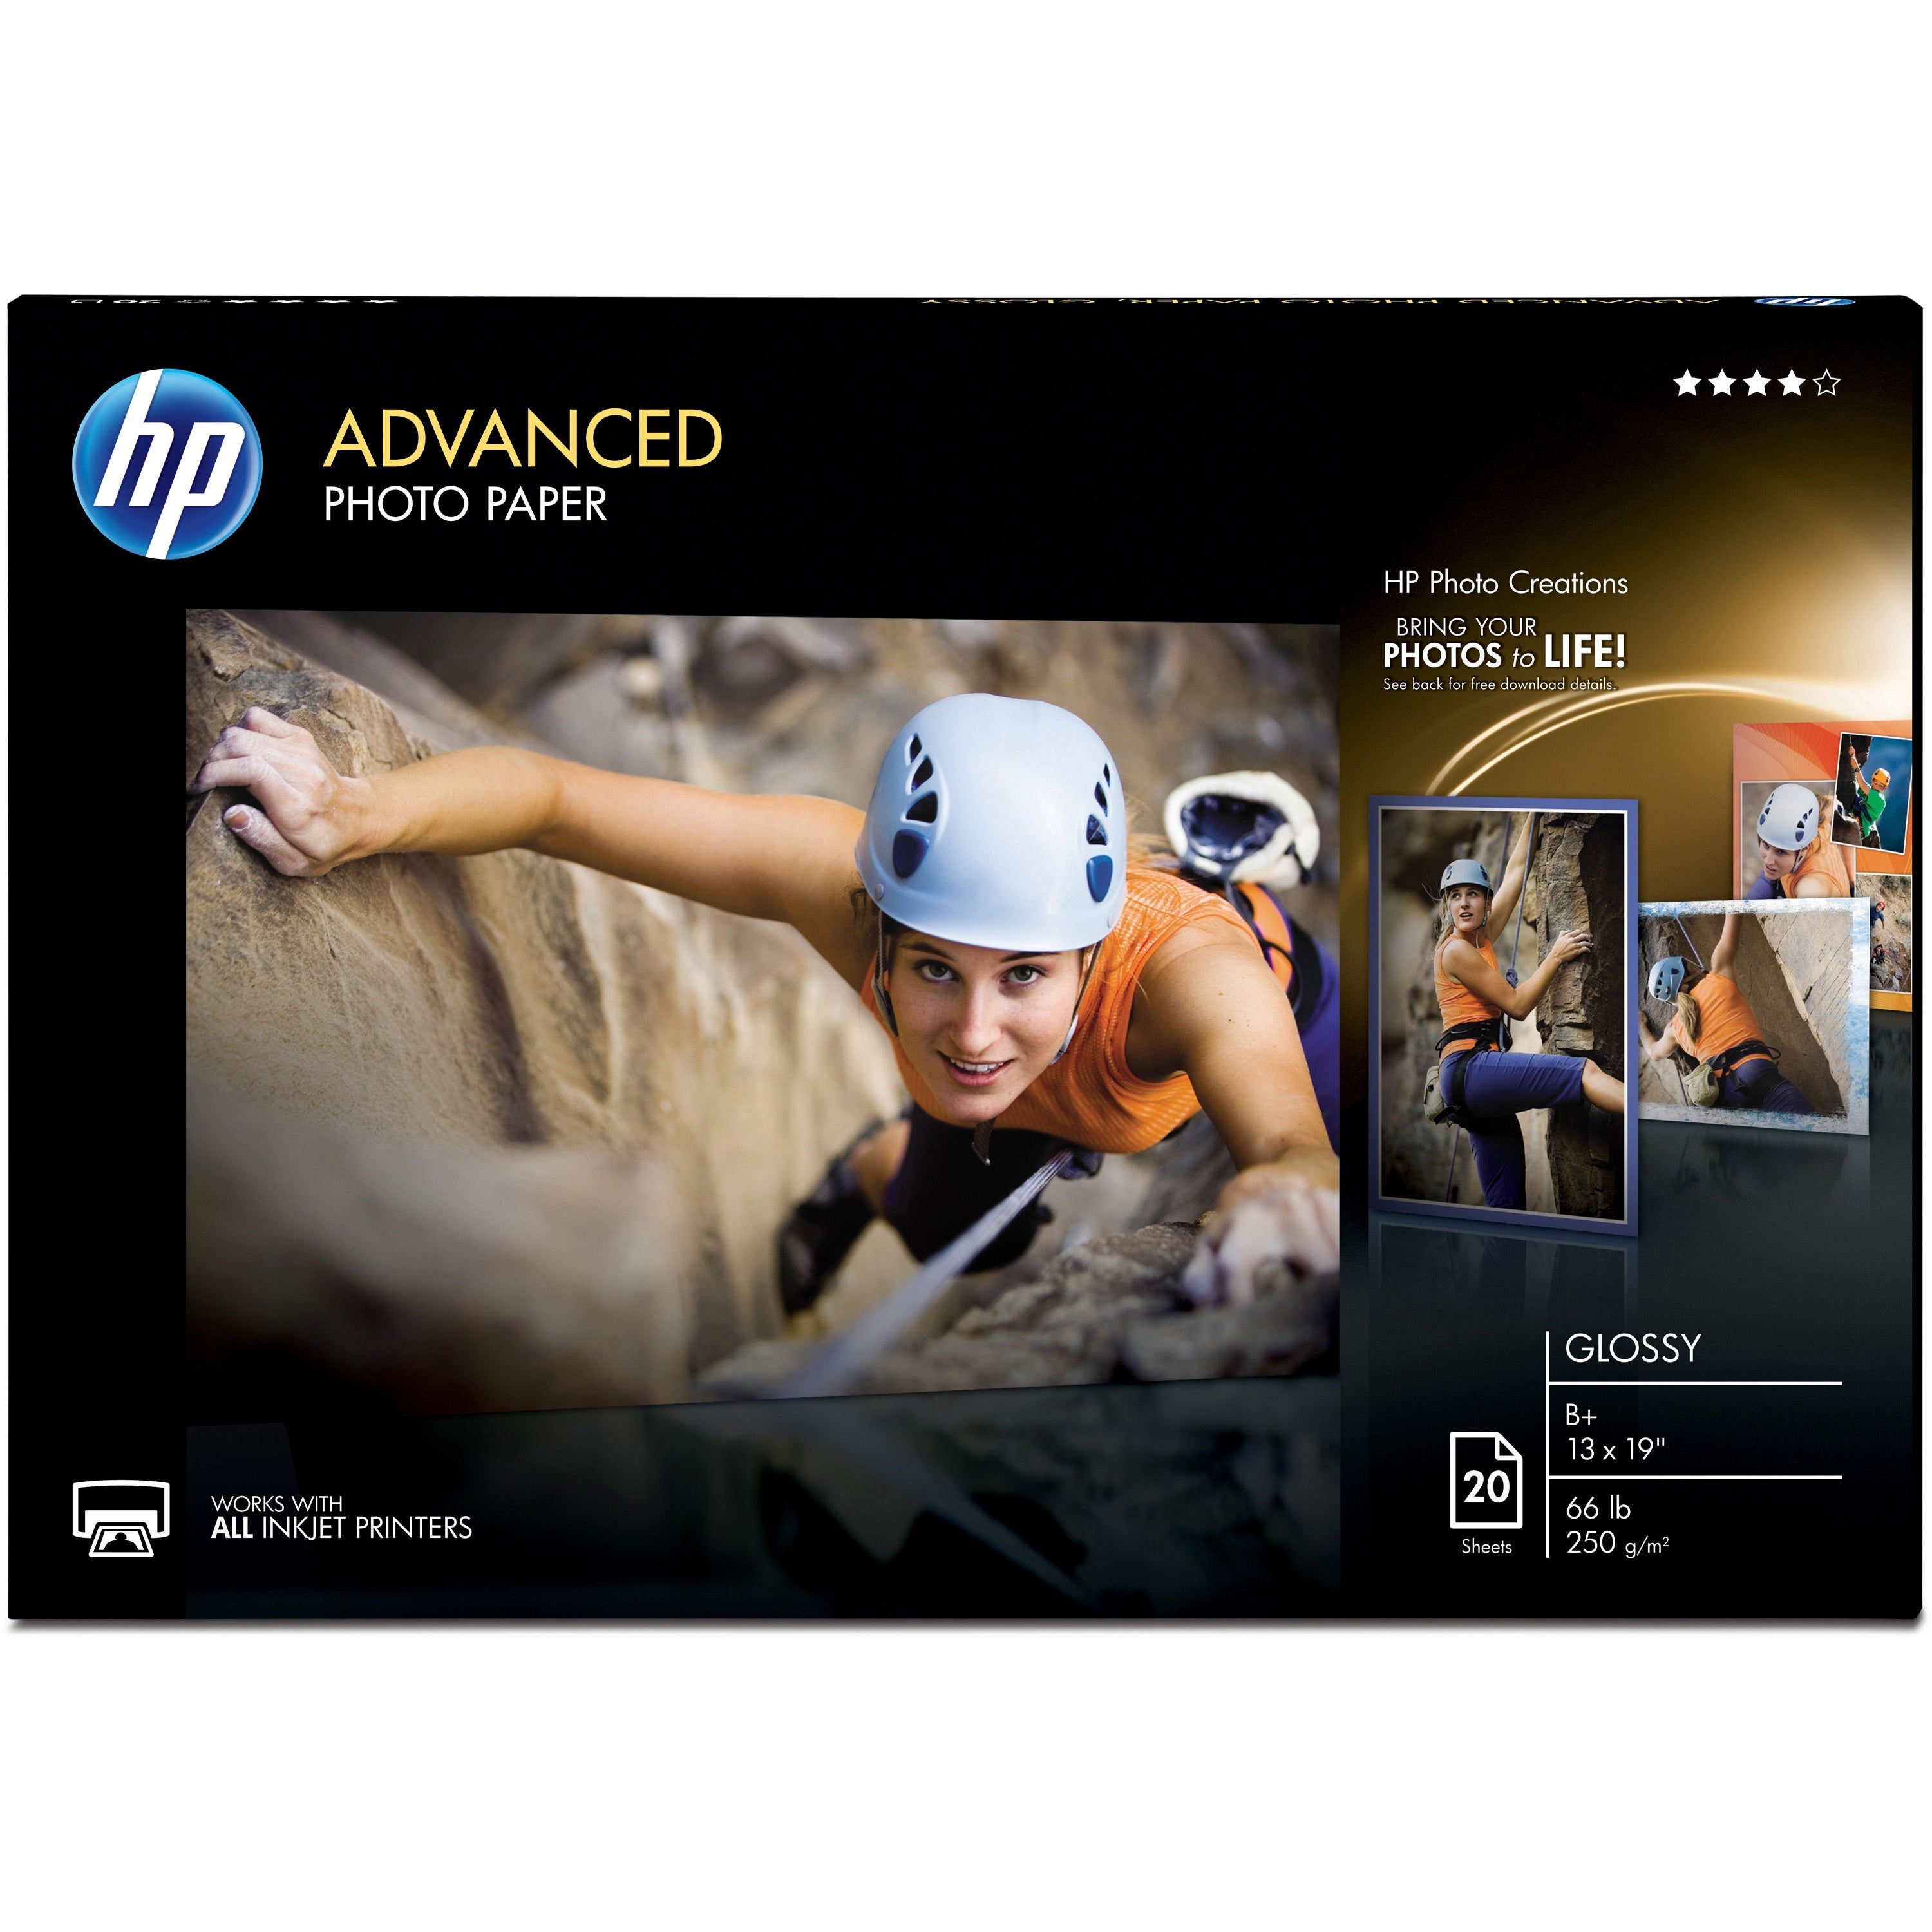 HP CR696A Advanced Glossy Photo Paper - Super B - 13" x 19" - 66 lb Basis Weight - Glossy - 1 / Pack - Quick Drying, Water Resistant, Smear Resistant, Humidity Resistant, Smudge Resistant